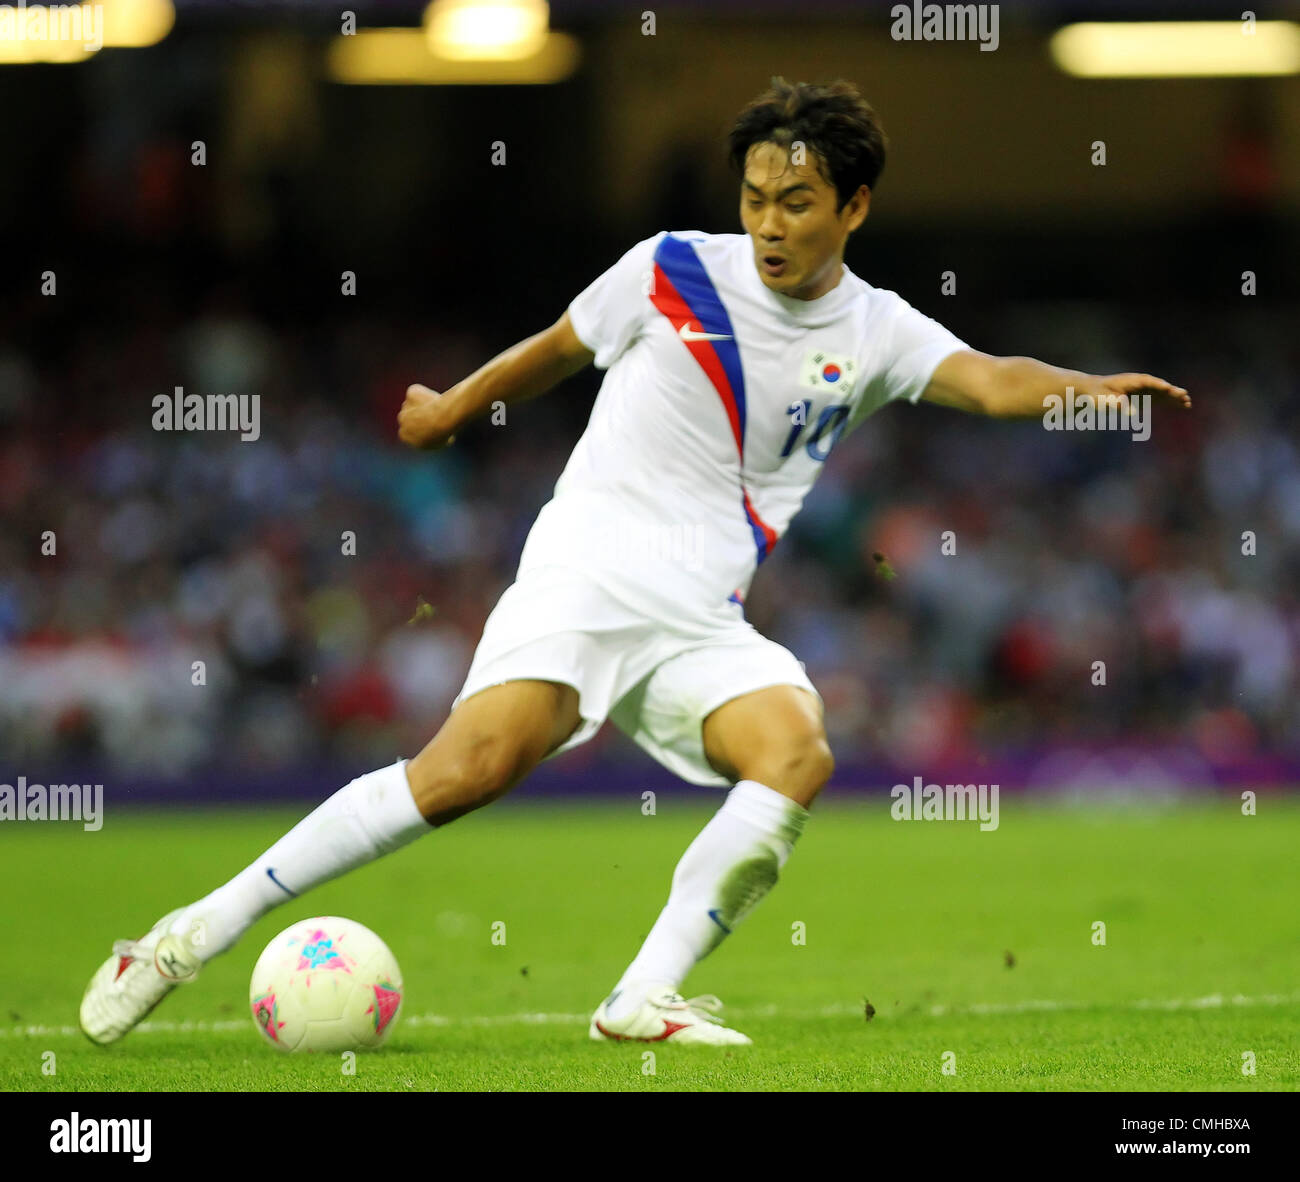 10th Aug 2012. 10.08.2012 Cardiff, Wales. South Korea Forward Park Chu-Young (Arsenal) scores the goal to put South Korea into the lead during the Olympic Football Men's Bronze Medal Match between Japan and Republic of Korea. Stock Photo